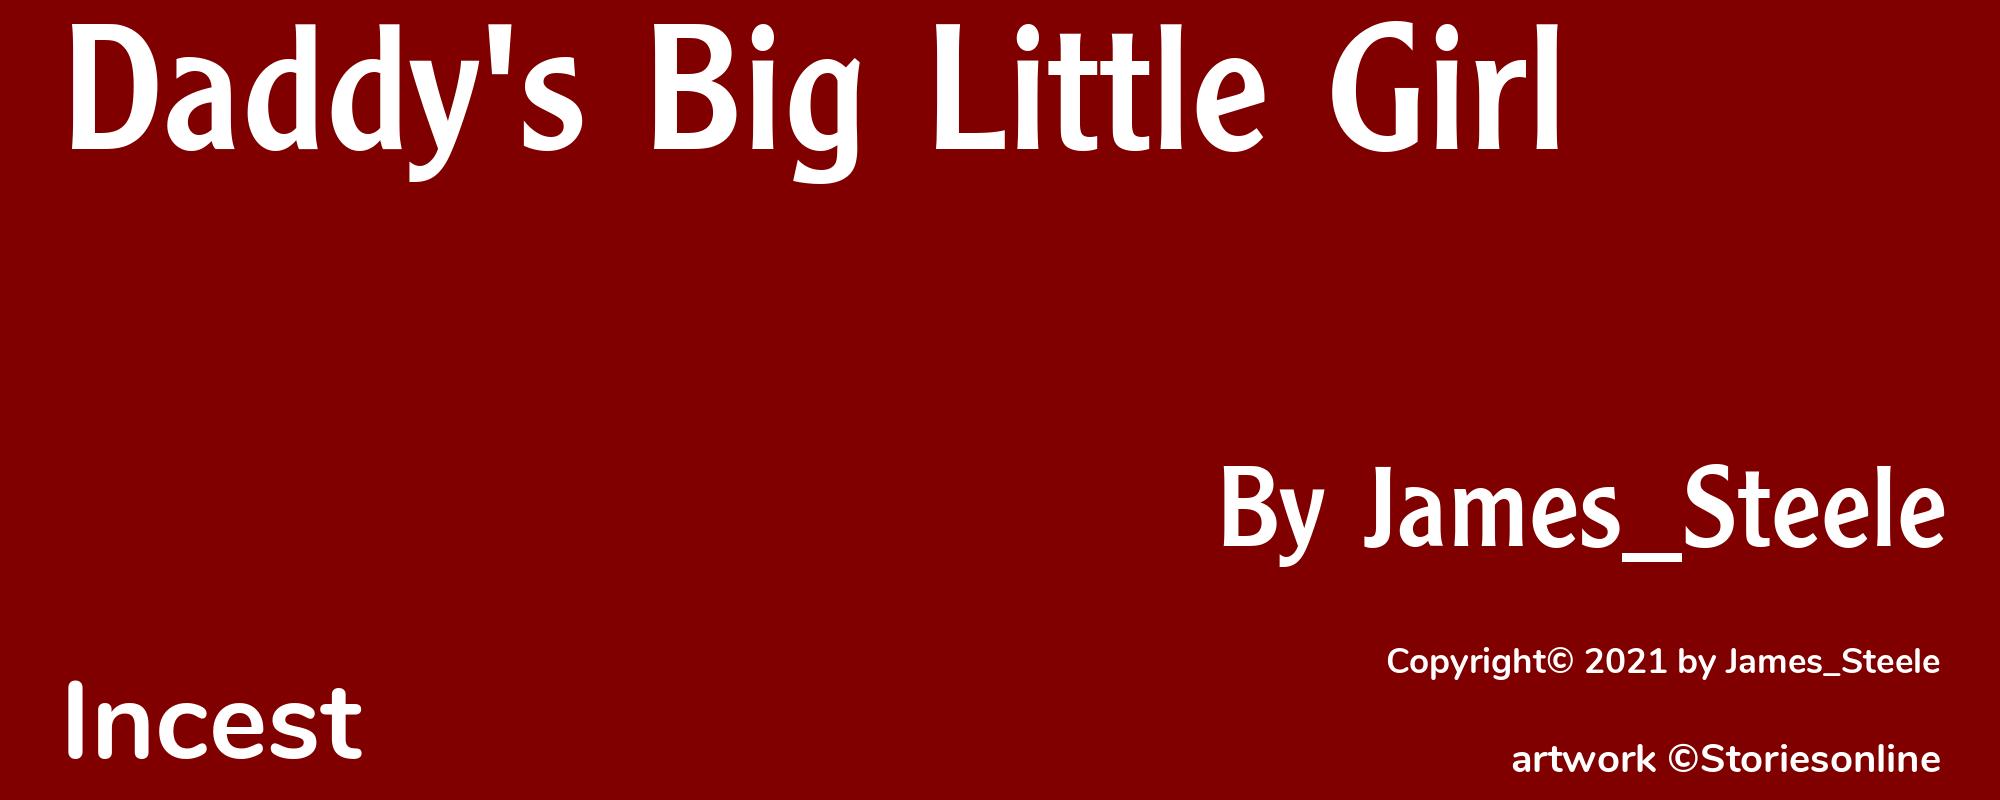 Daddy's Big Little Girl - Cover